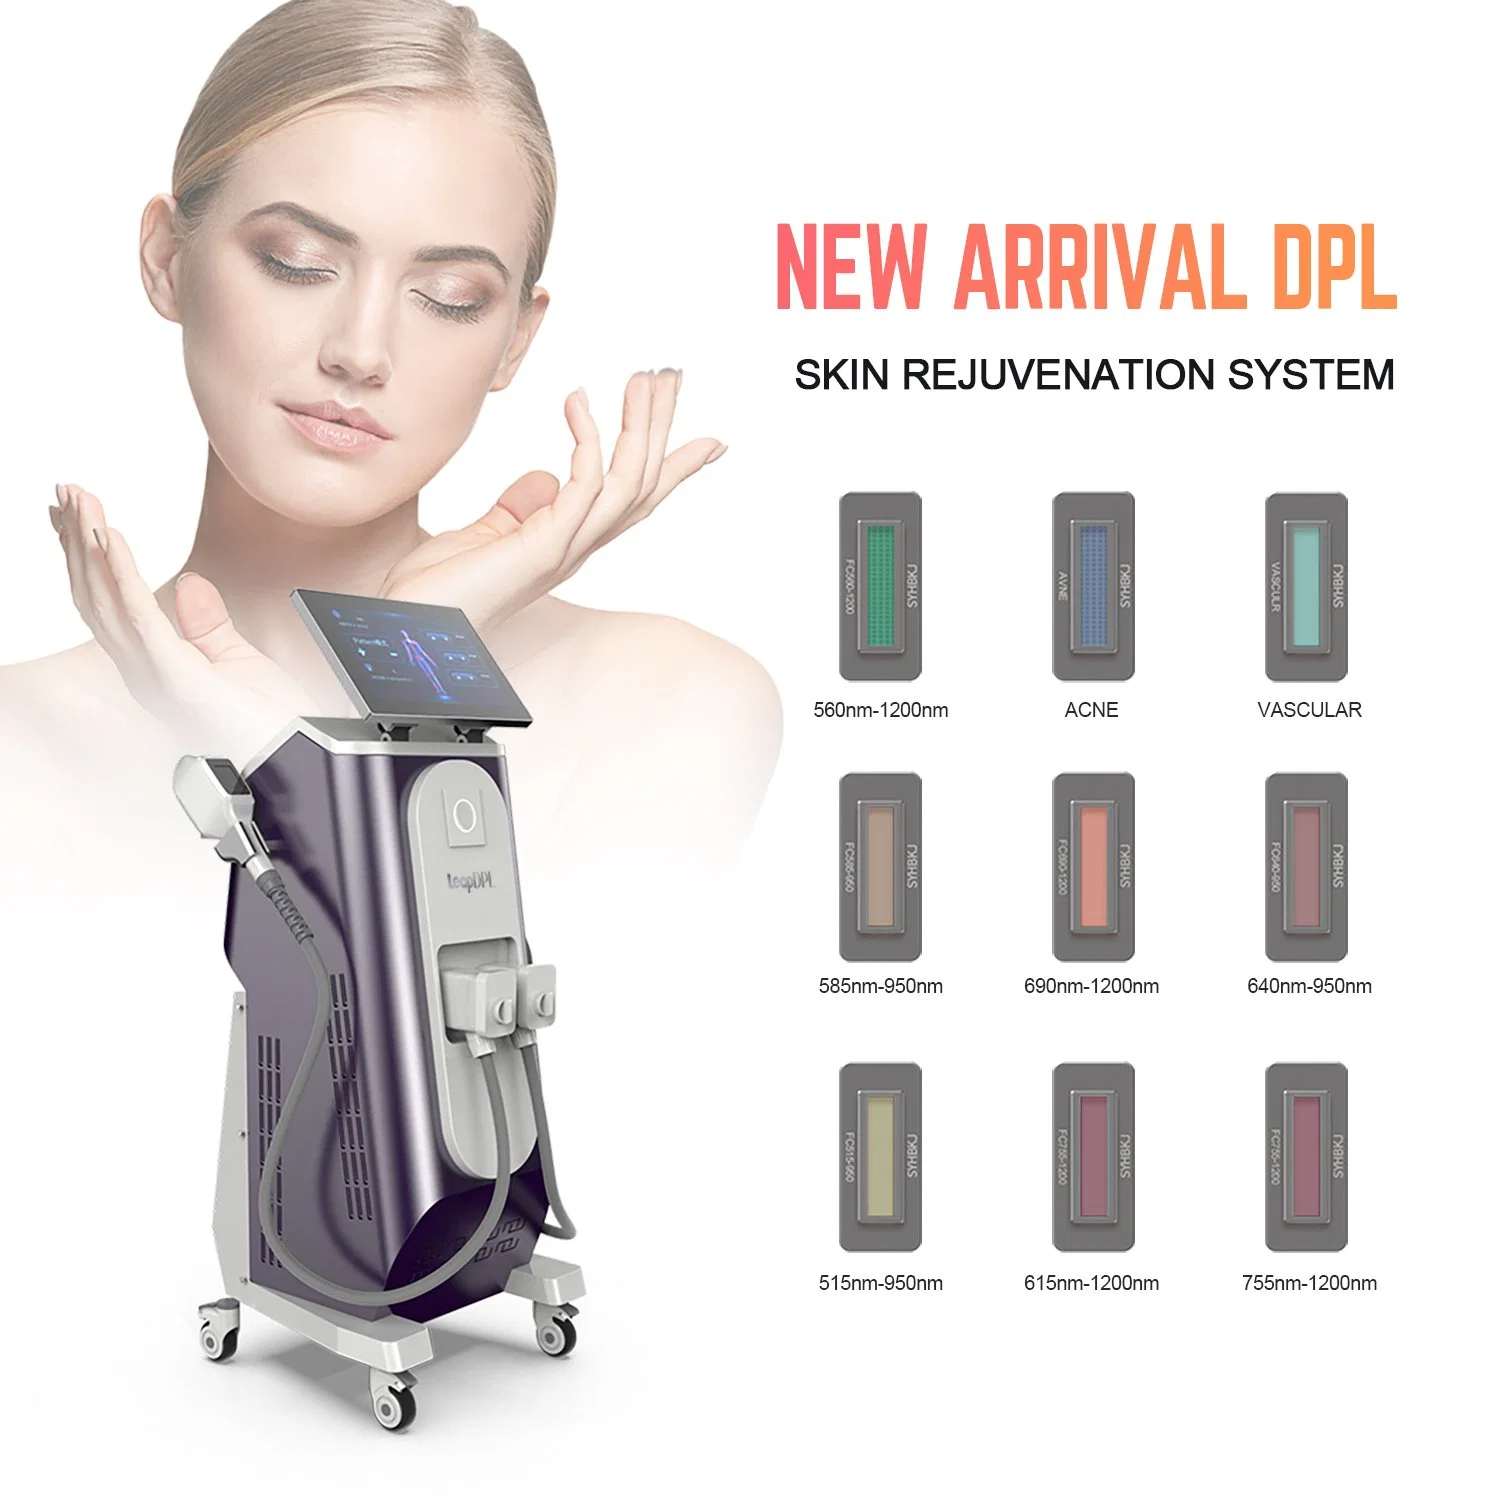 The Best-Selling Carbon Laser IPL Opt Hair Removal and Skin Rejuvenation 3-in-1 Multi-Function Machine